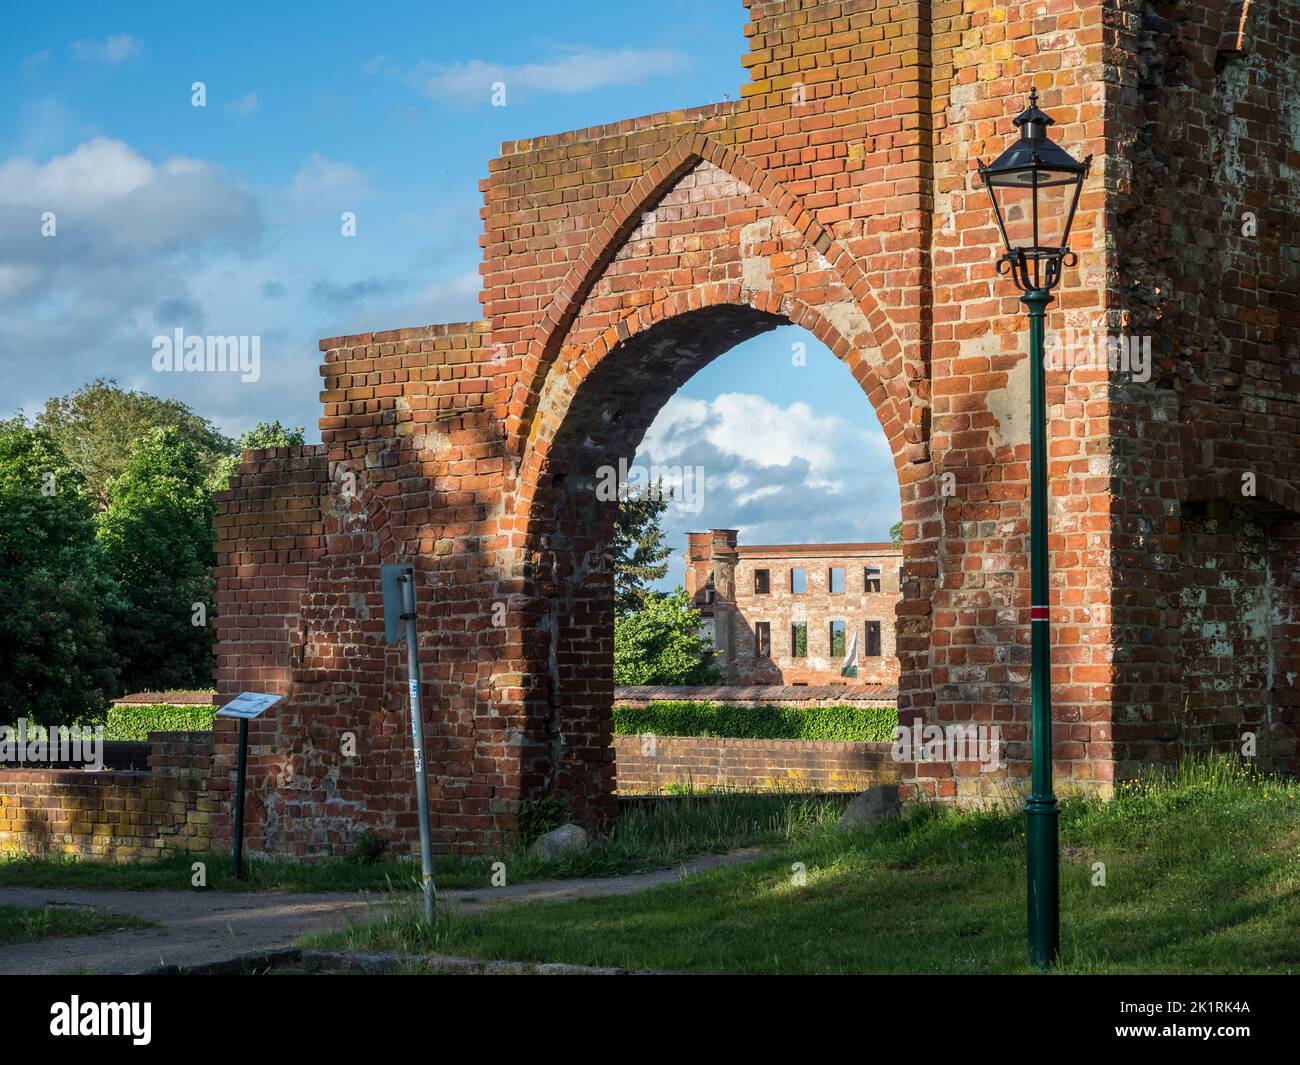 Ruins of monastery and castle buildings in Dargun, Mecklenburg-Western Pomerania, Germany Stock Photo